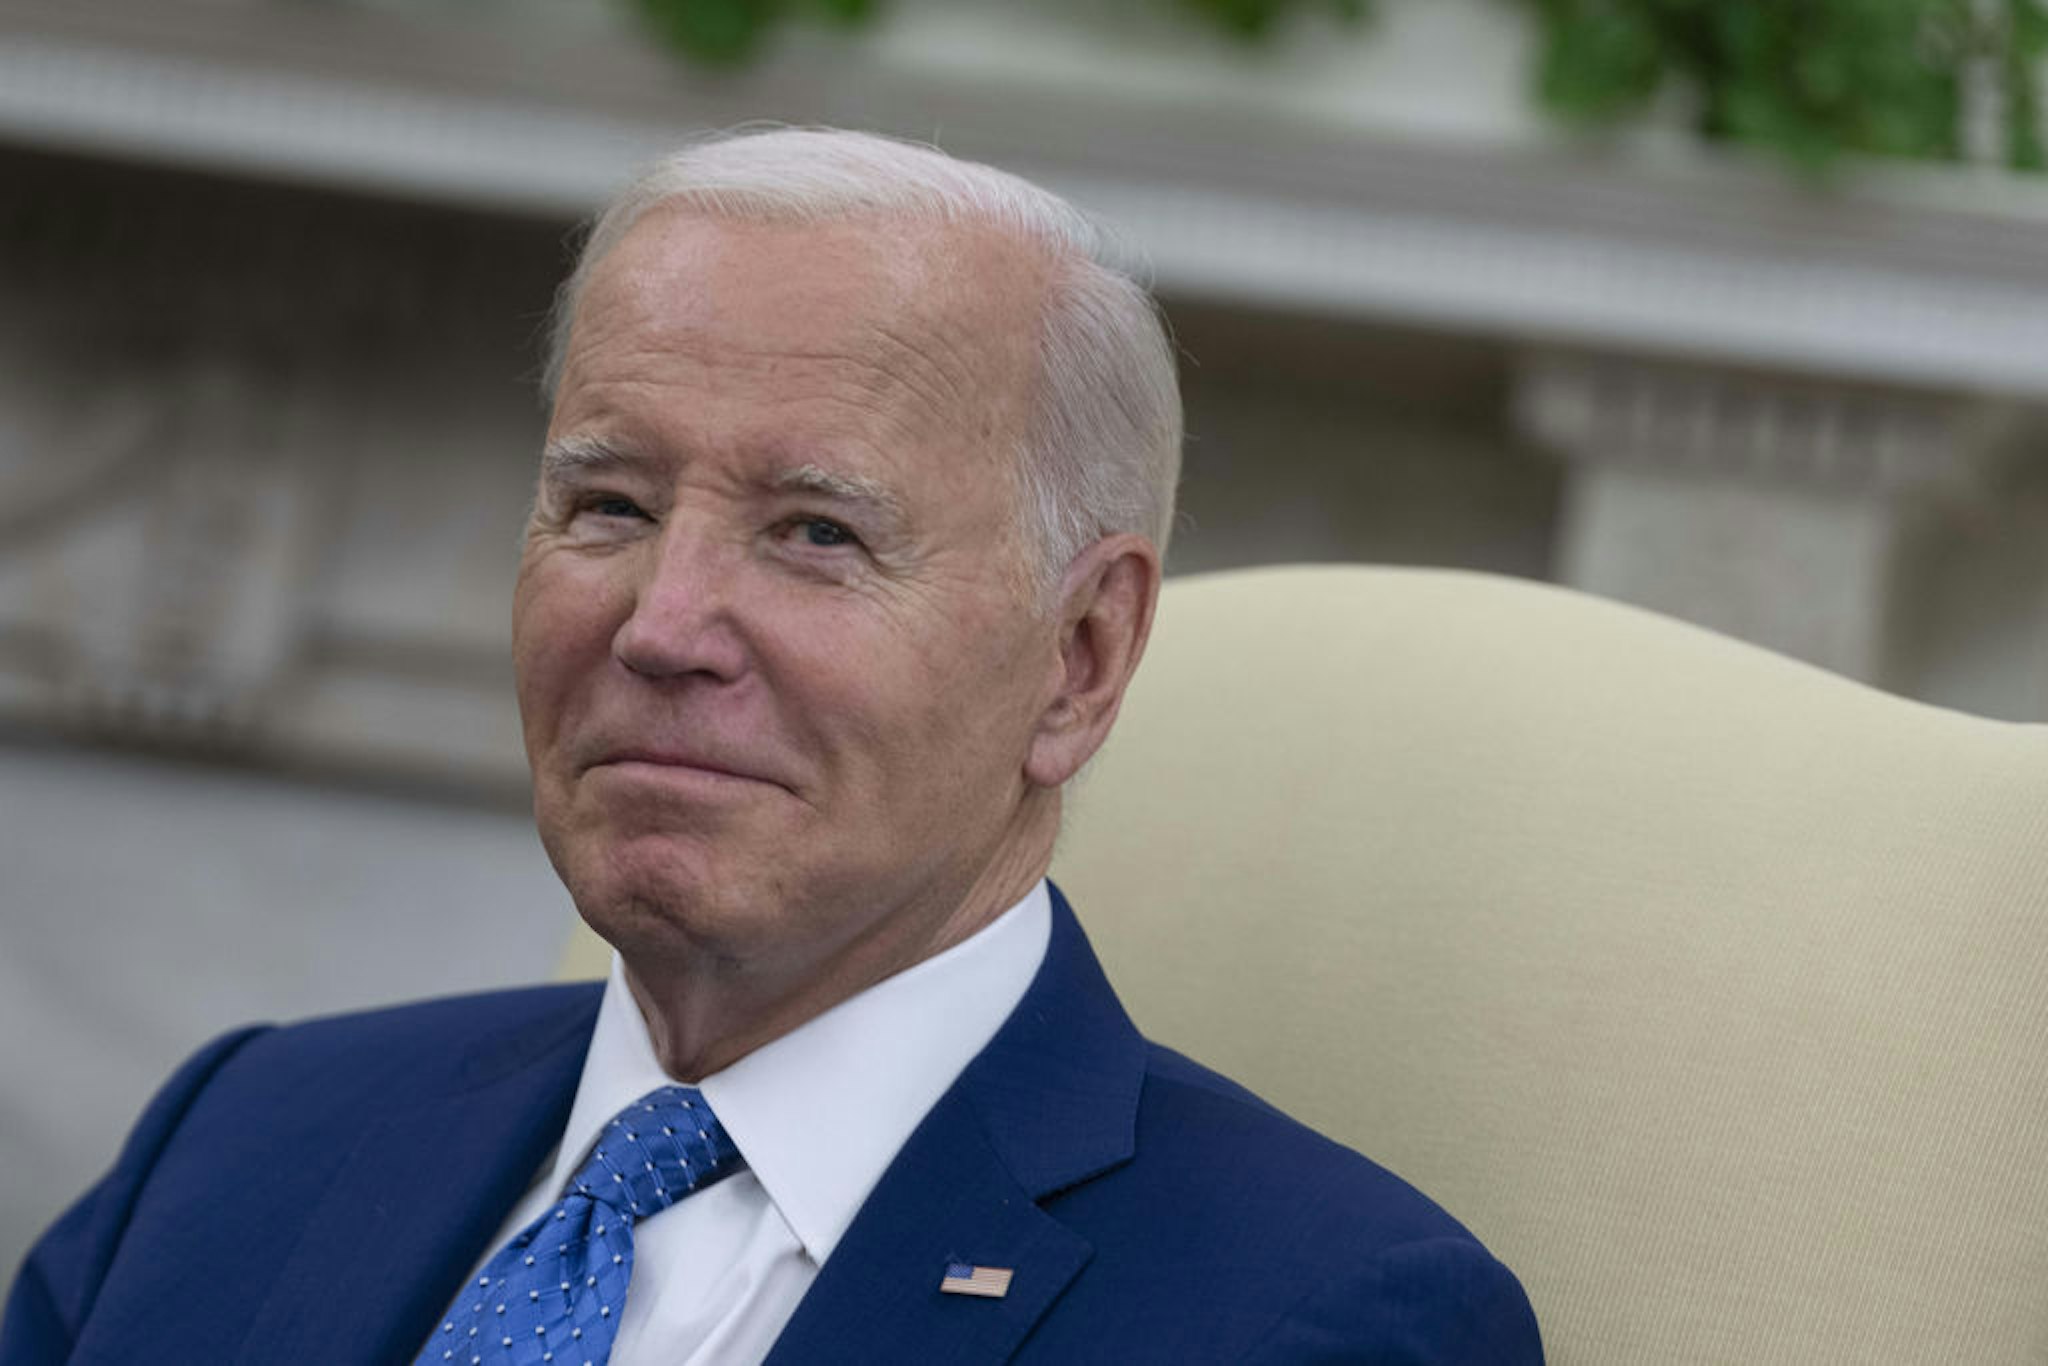 US President Joe Biden during a meeting with Ulf Kristersson, Sweden's prime minister, not pictured, in the Oval Office of the White House in Washington, DC, US, on Wednesday, July 5, 2023. Biden will discuss security cooperation with Kristersson, according to a statement from his office, with the pair planning to reaffirm their view that Sweden should join the North Atlantic Treaty Organization as soon as possible.